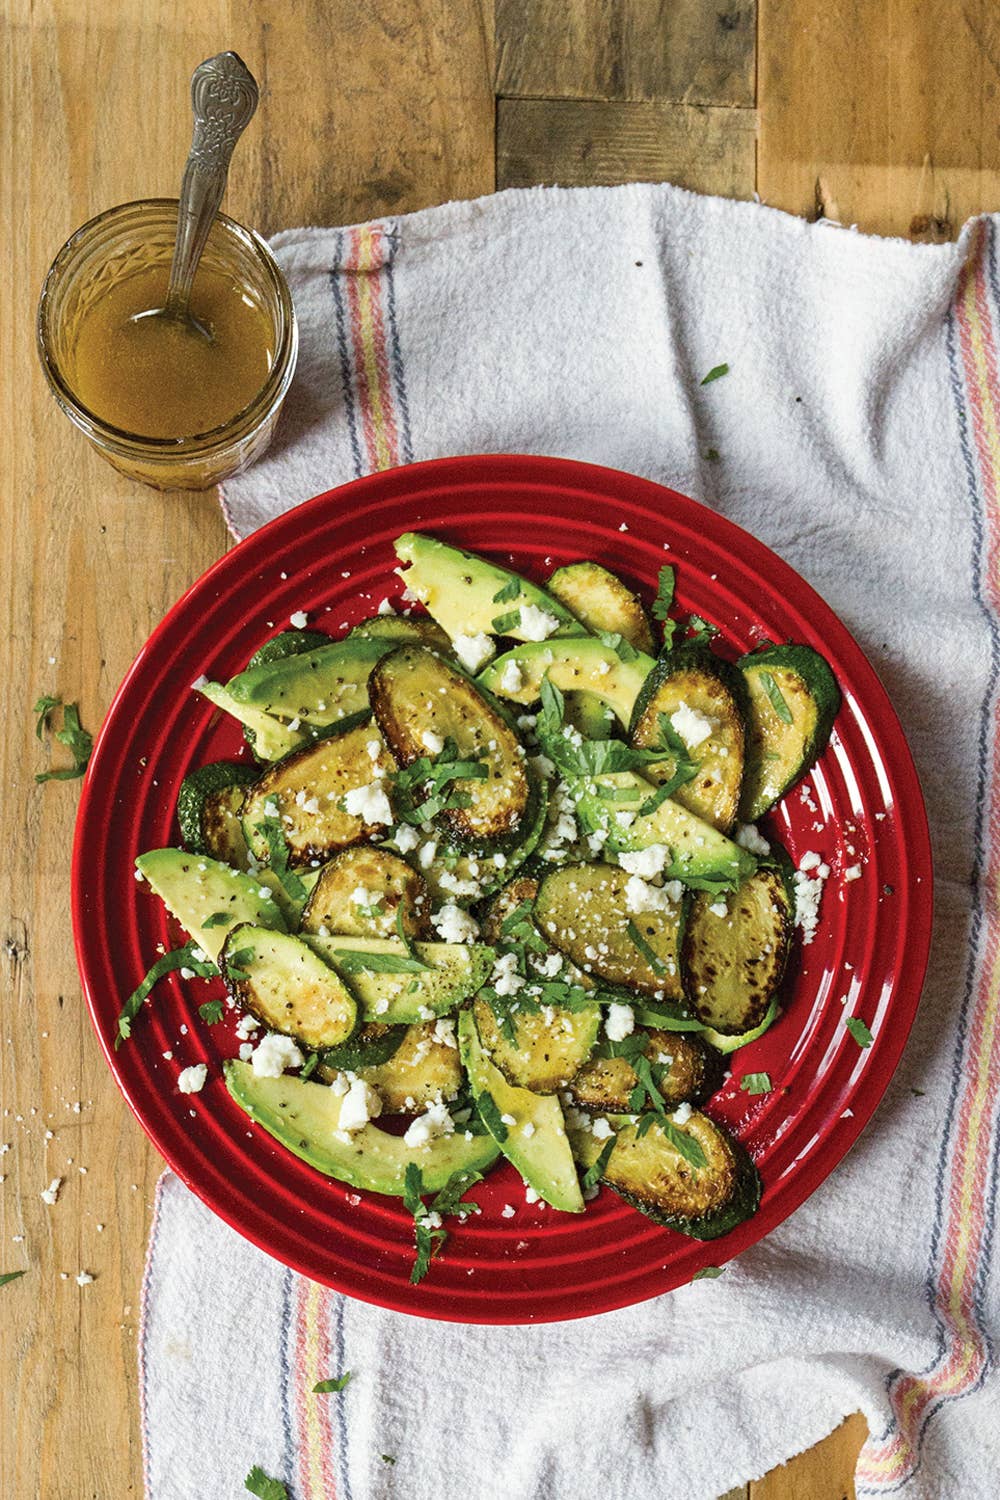 23 Zucchini Recipes to Use Up Your Summer Bumper Crop